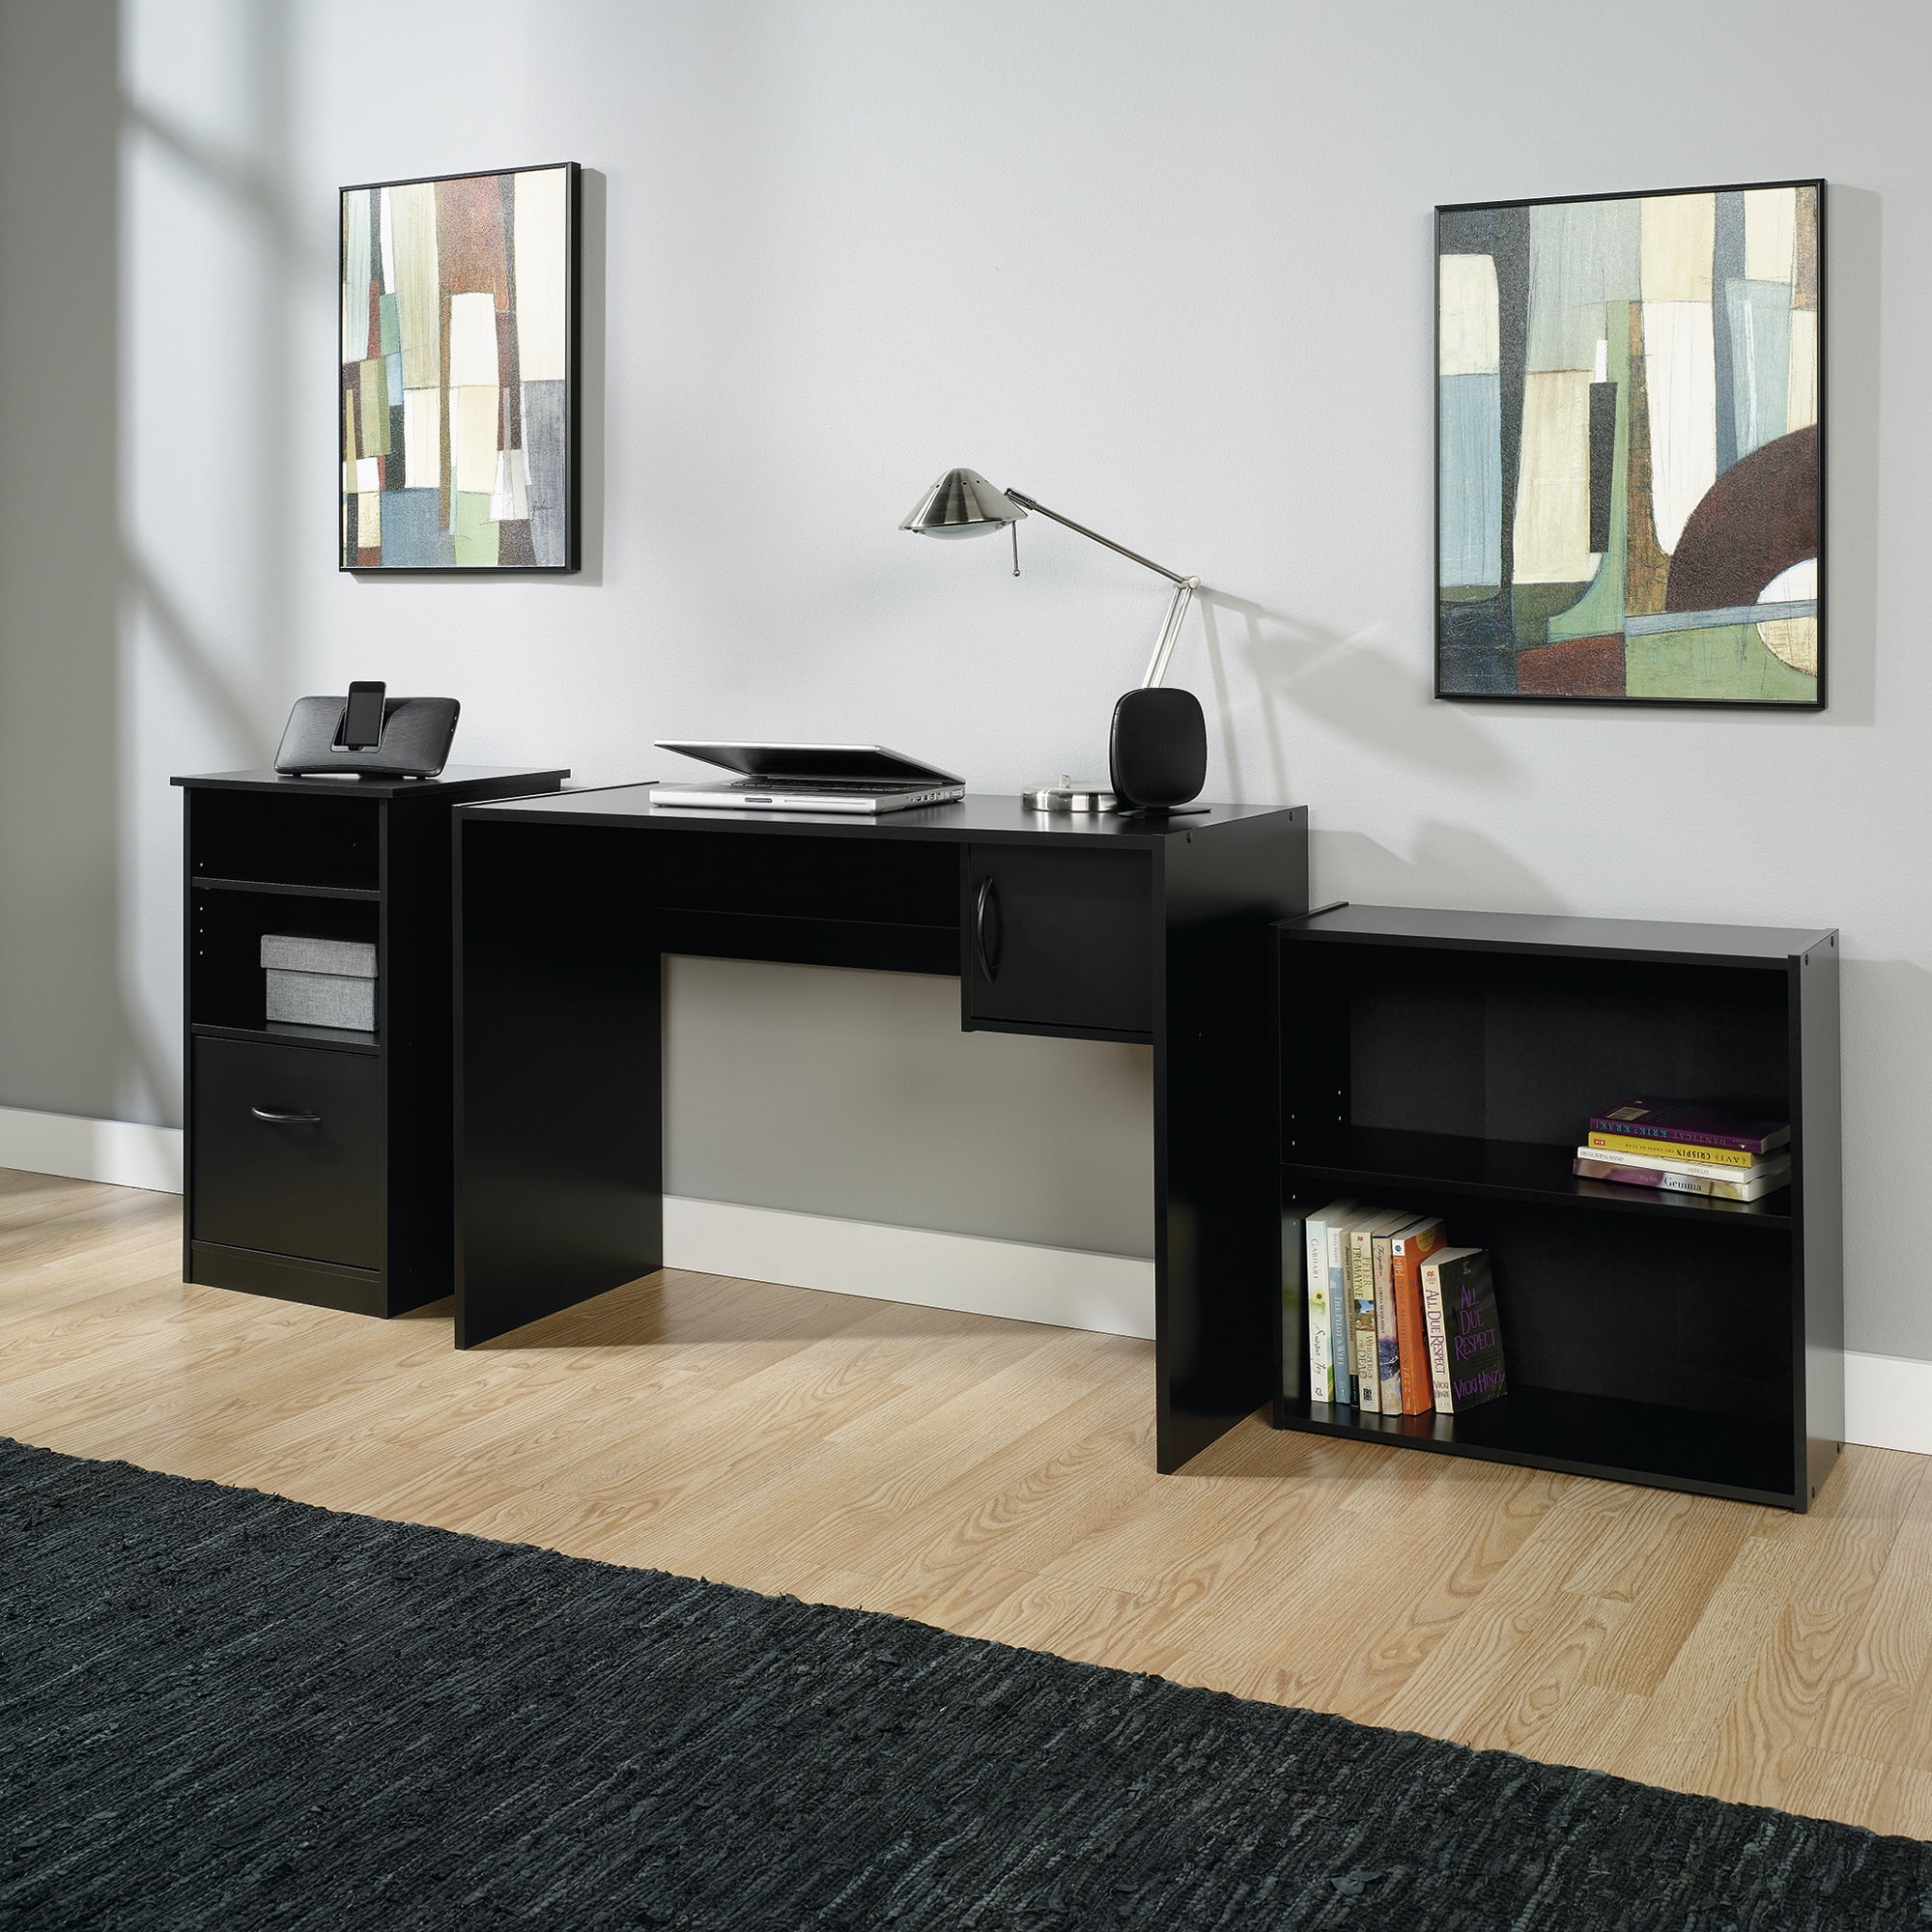 Mainstays 3 Piece Desk And Bookcase Office Set Black Finish